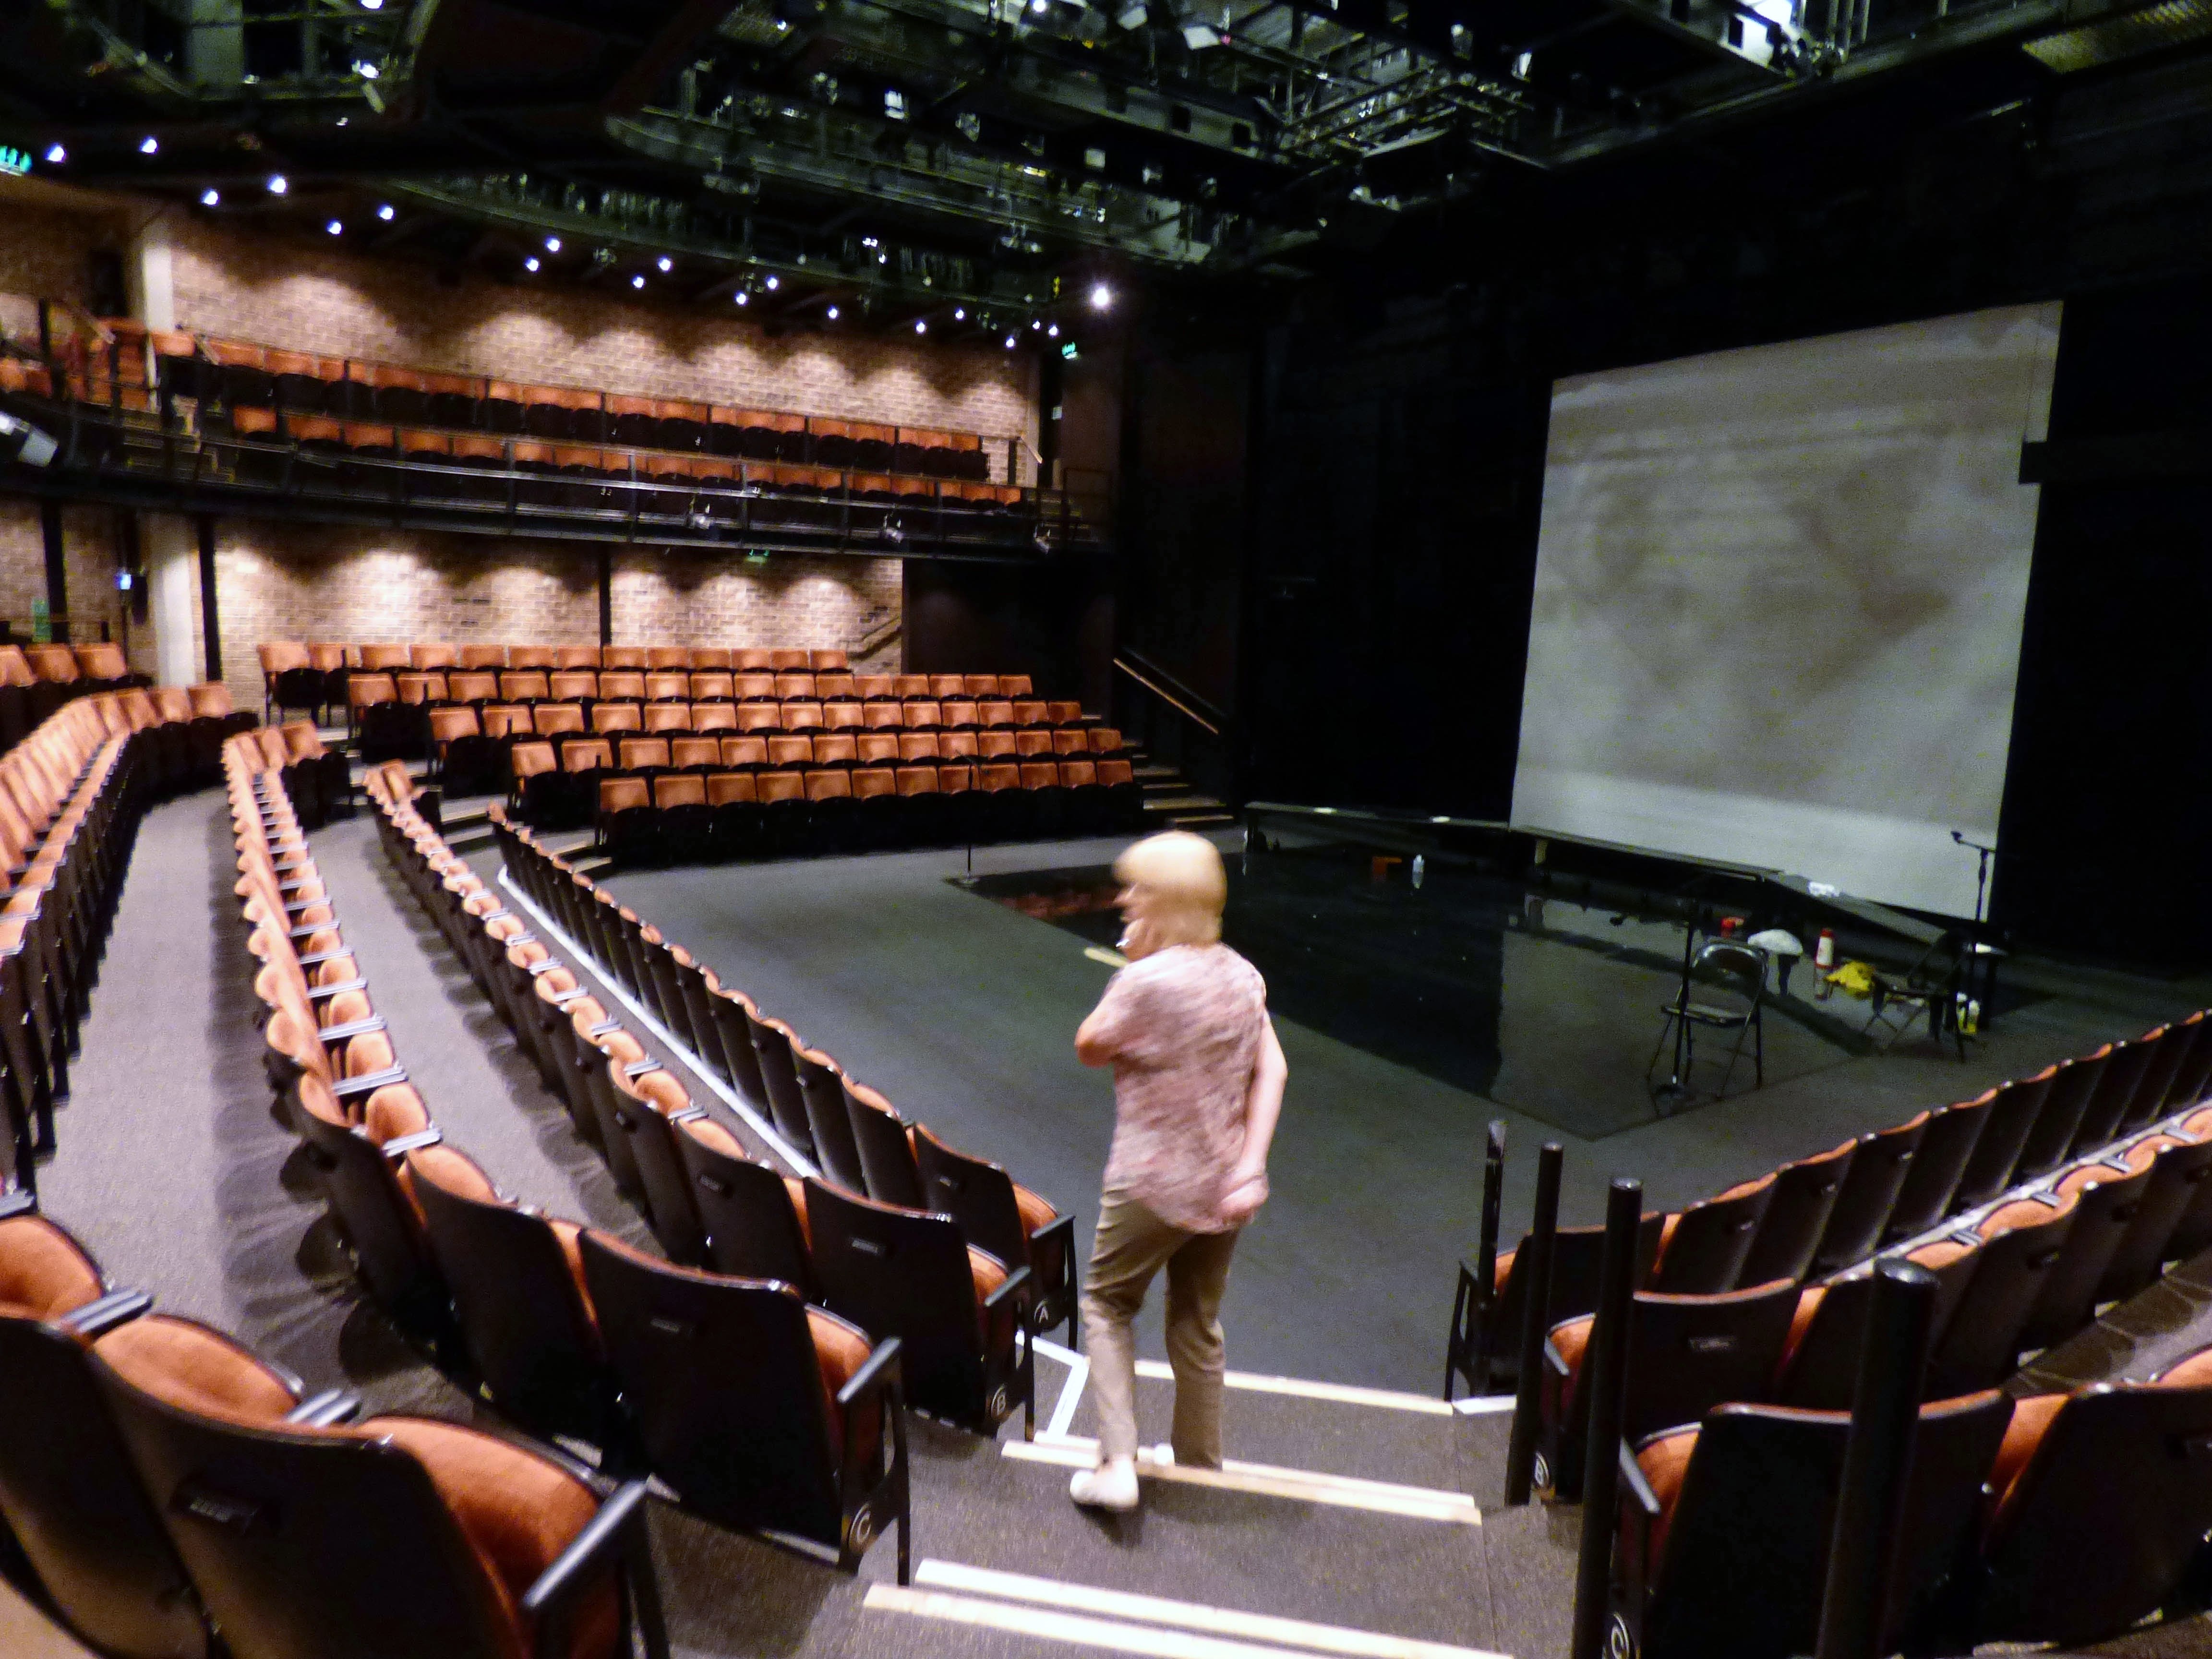 The seatng area and stage of Everyman Theatre, Liverpool, July 2016